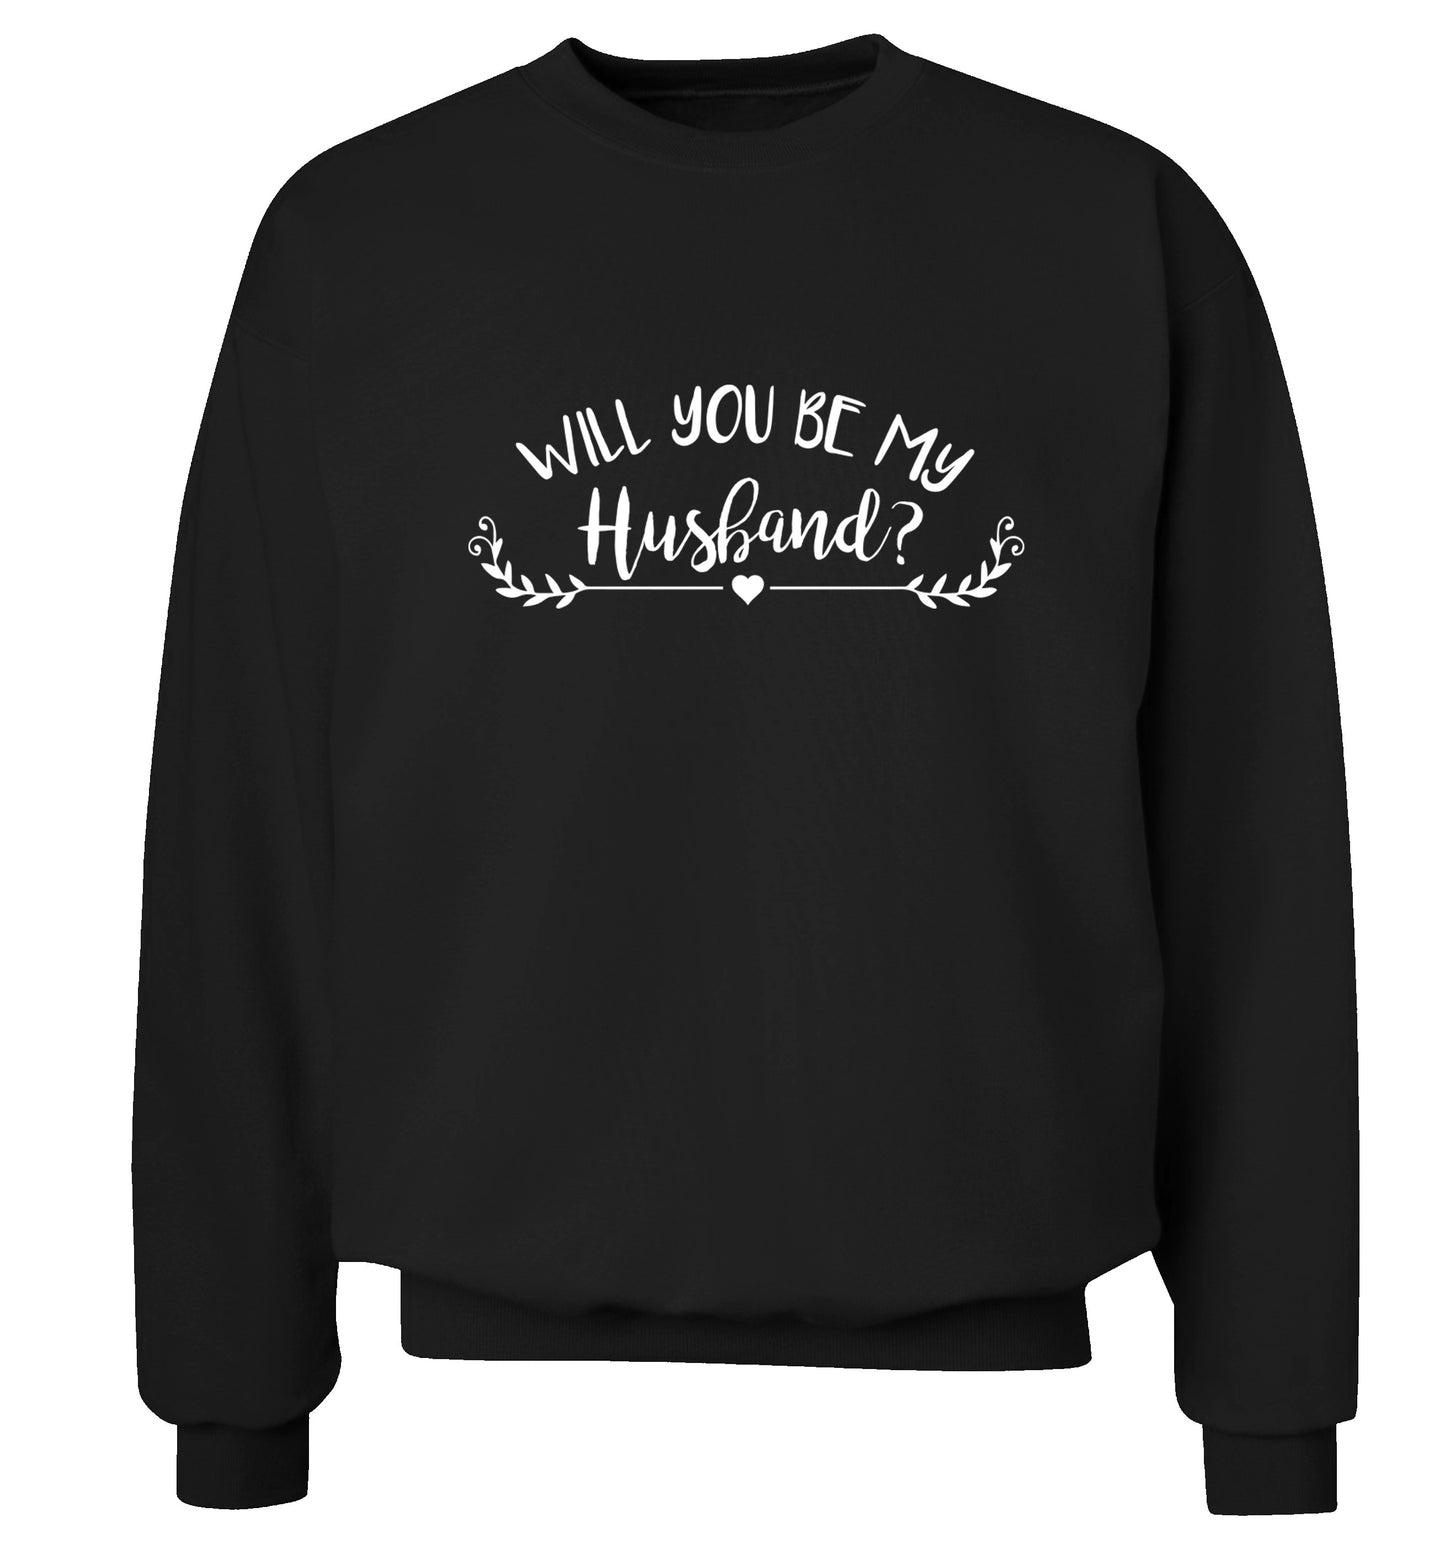 Will you be my husband? Adult's unisex black Sweater 2XL